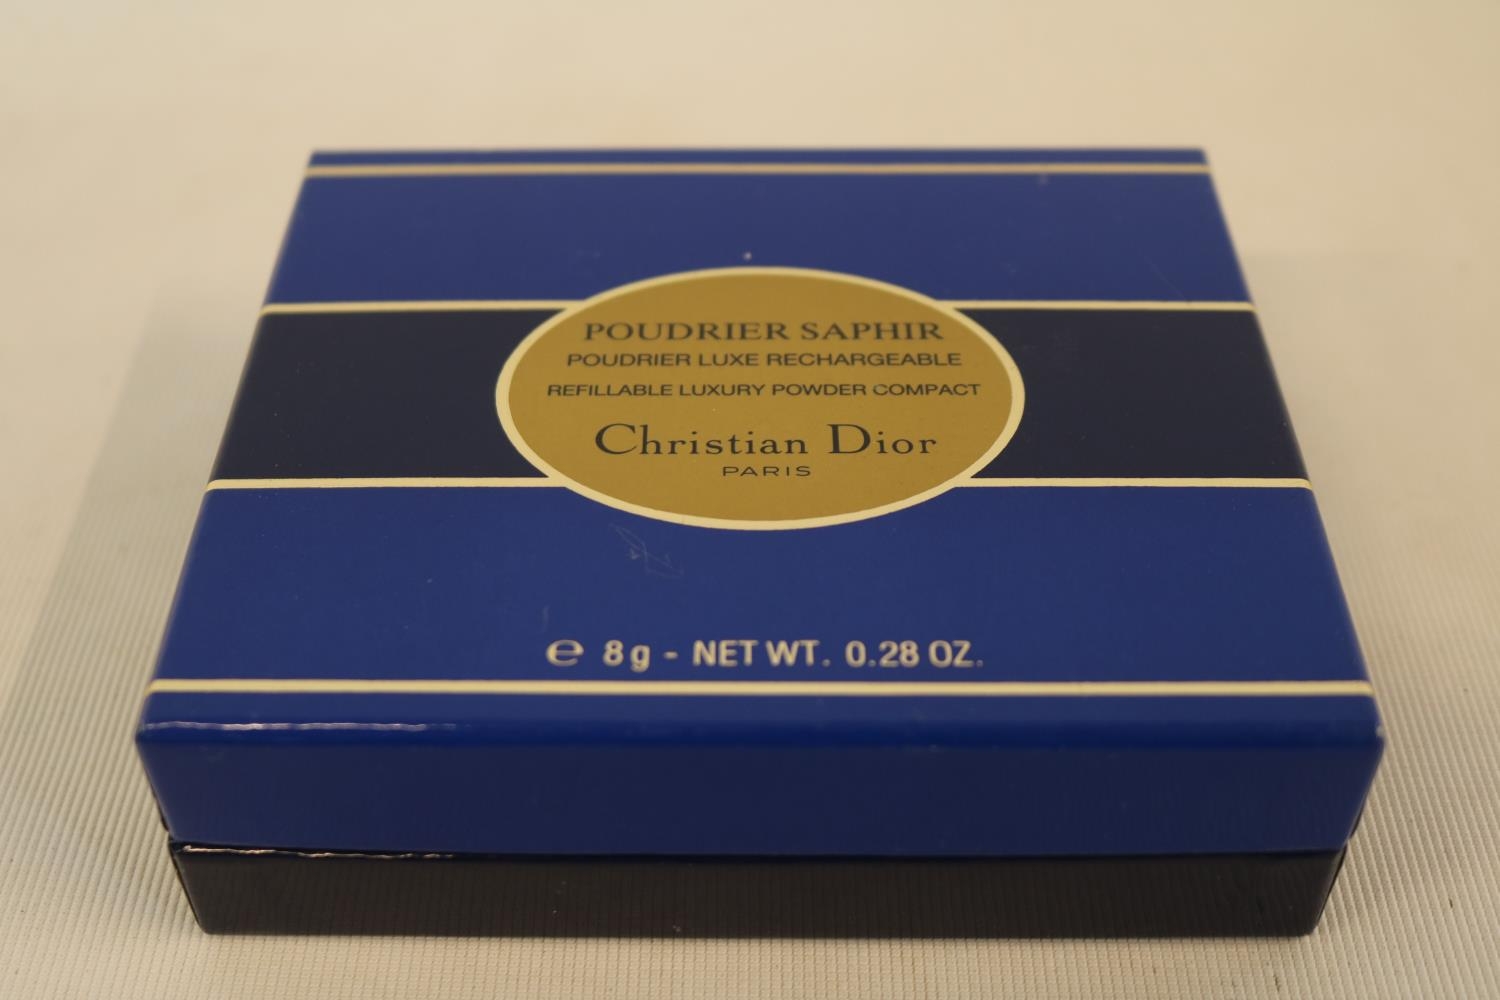 Christian Dior of Paris Refillable Luxury Powder Compact Boxed and a Chanel Compact - Image 5 of 5